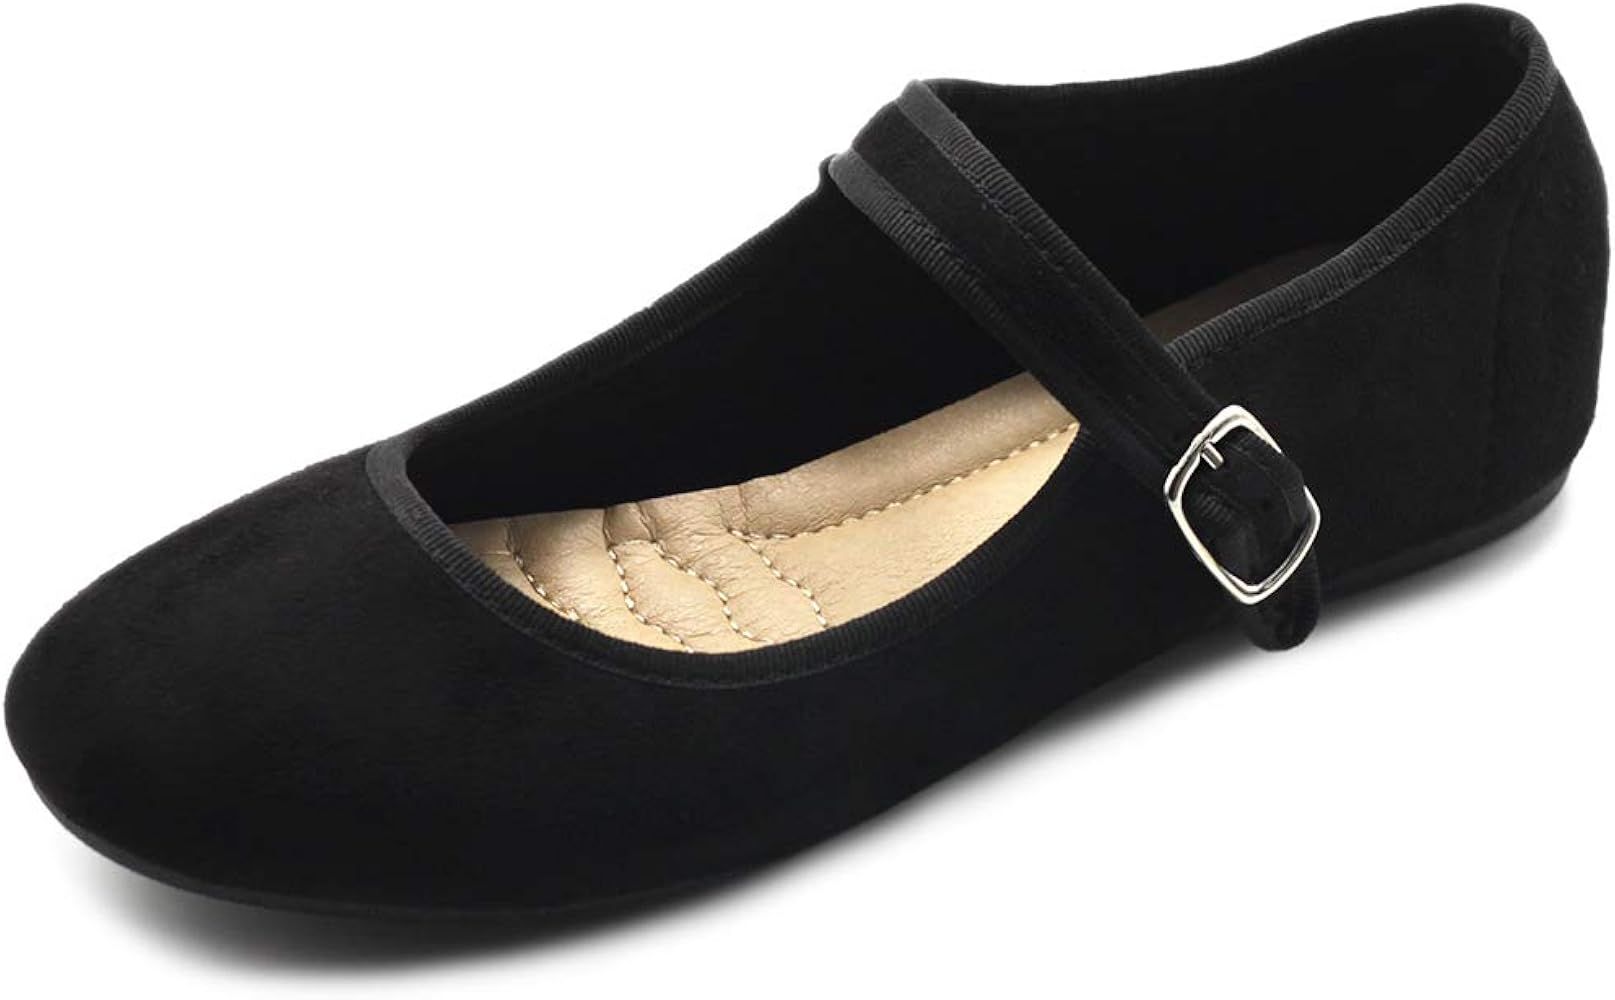 Ollio Women's Shoes Faux Suede Casual Mary Jane Light Ballet Flats | Amazon (US)